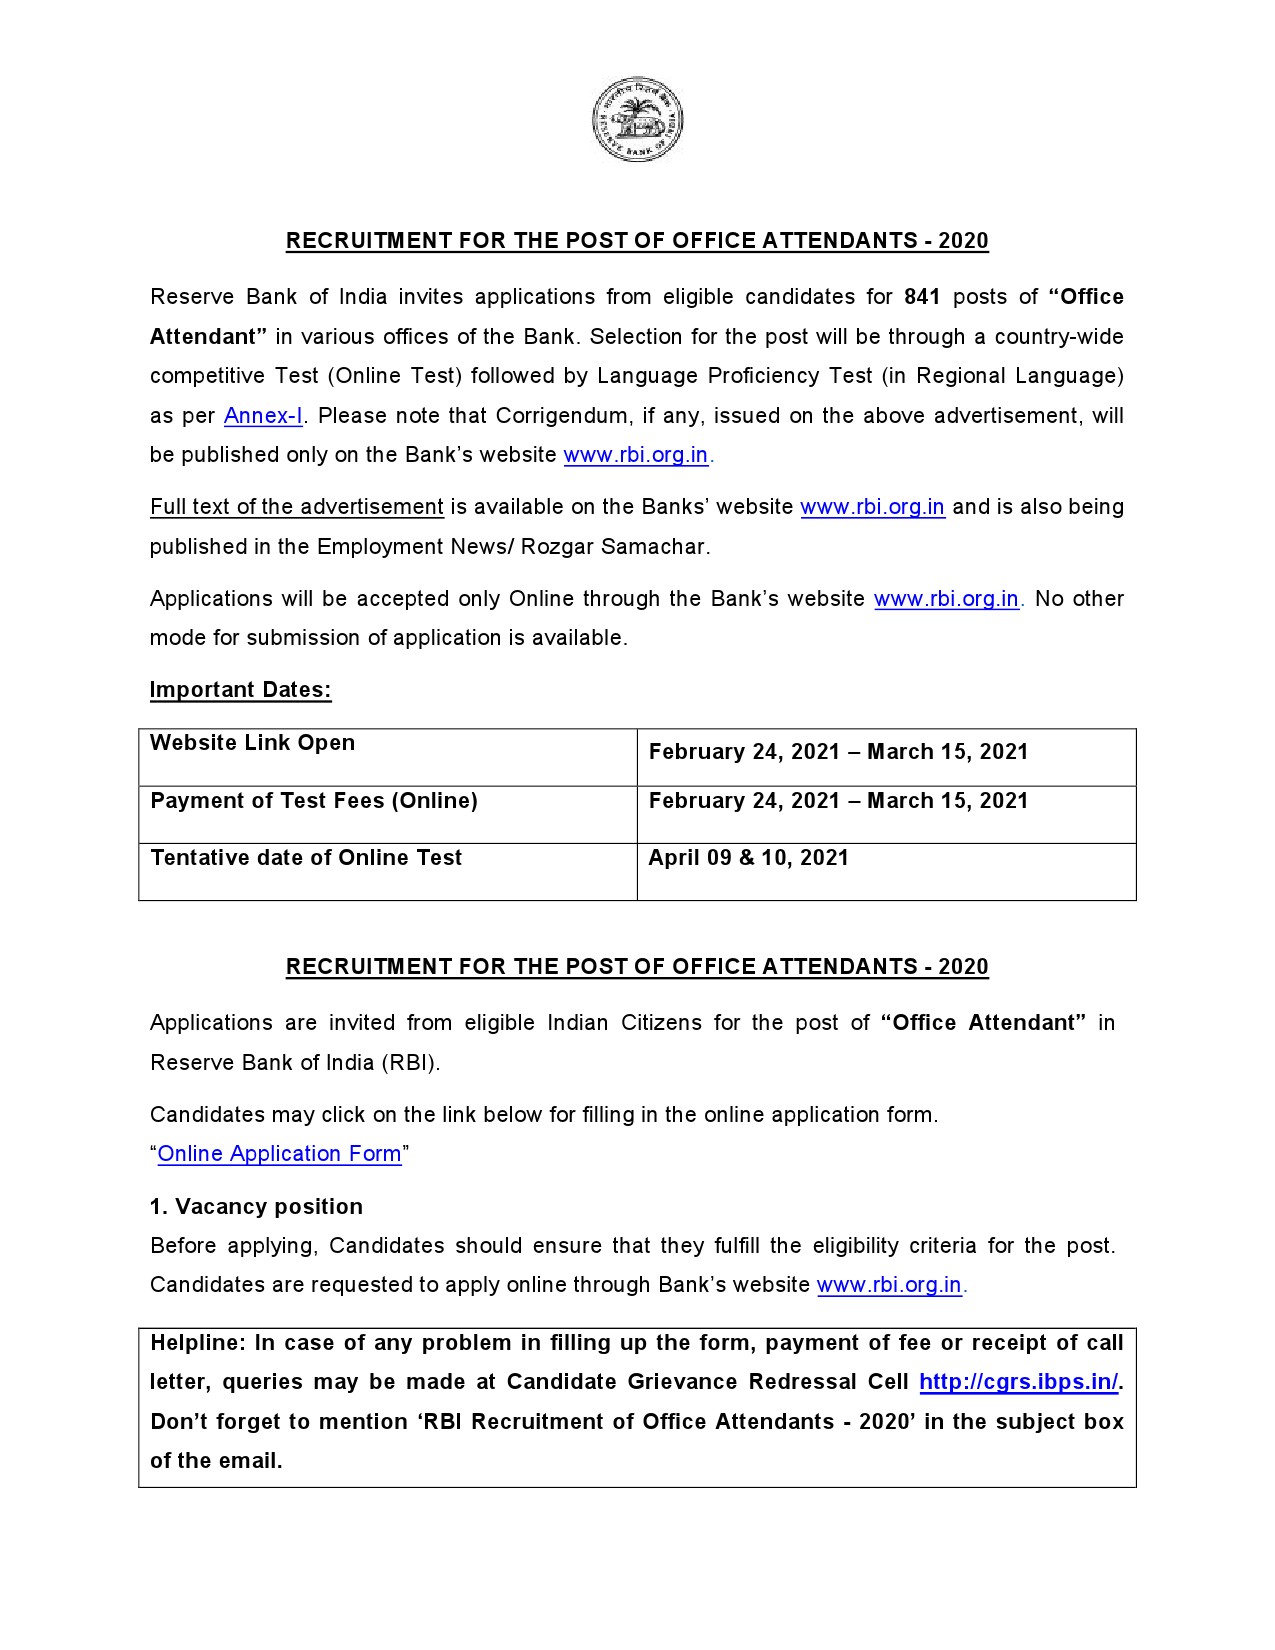 RECRUITMENT FOR THE POST OF OFFICE ATTENDANTS 2020 - Notification Image 1